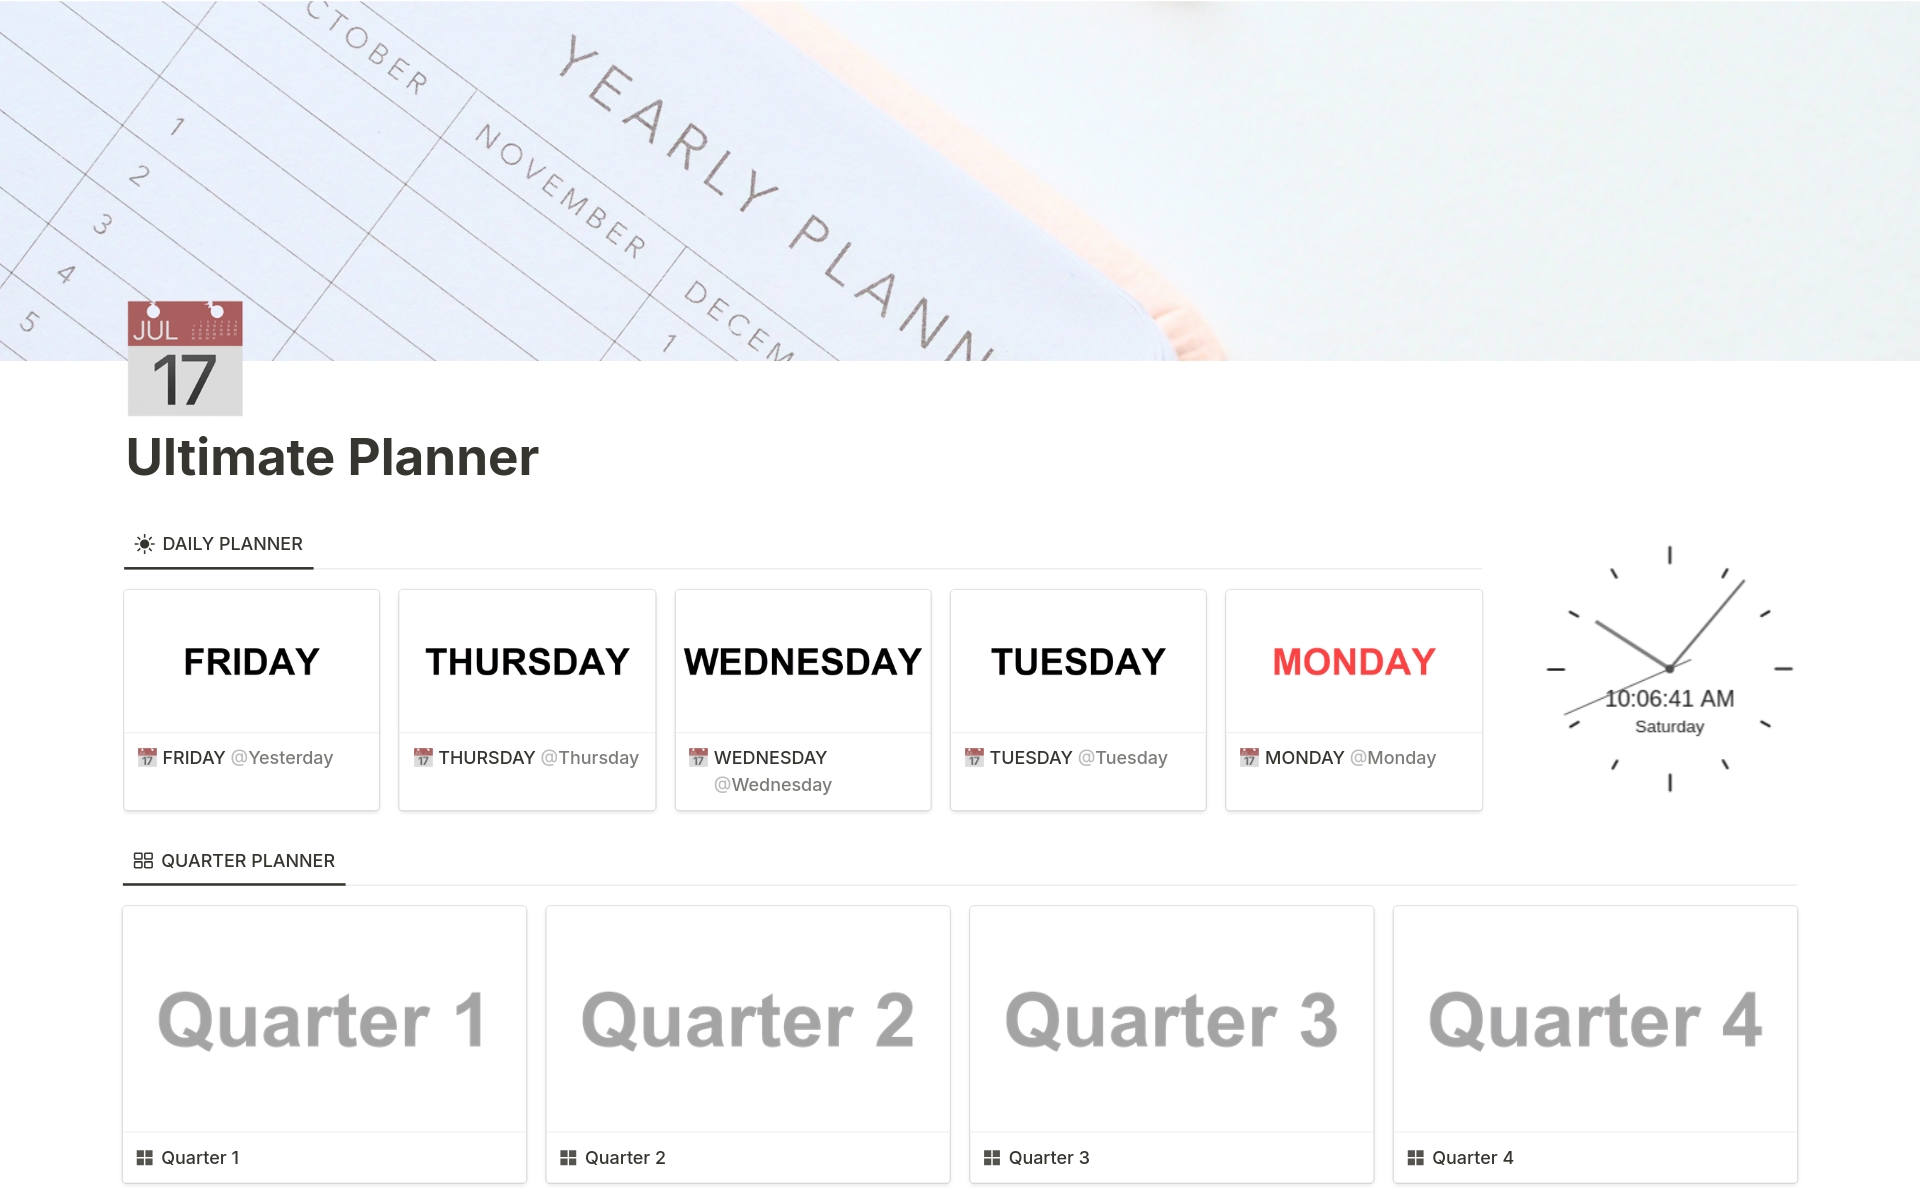 Reach your goals with planners

Form healthy habits and organize your life more efficiently with your Ultimate Planner Notion template